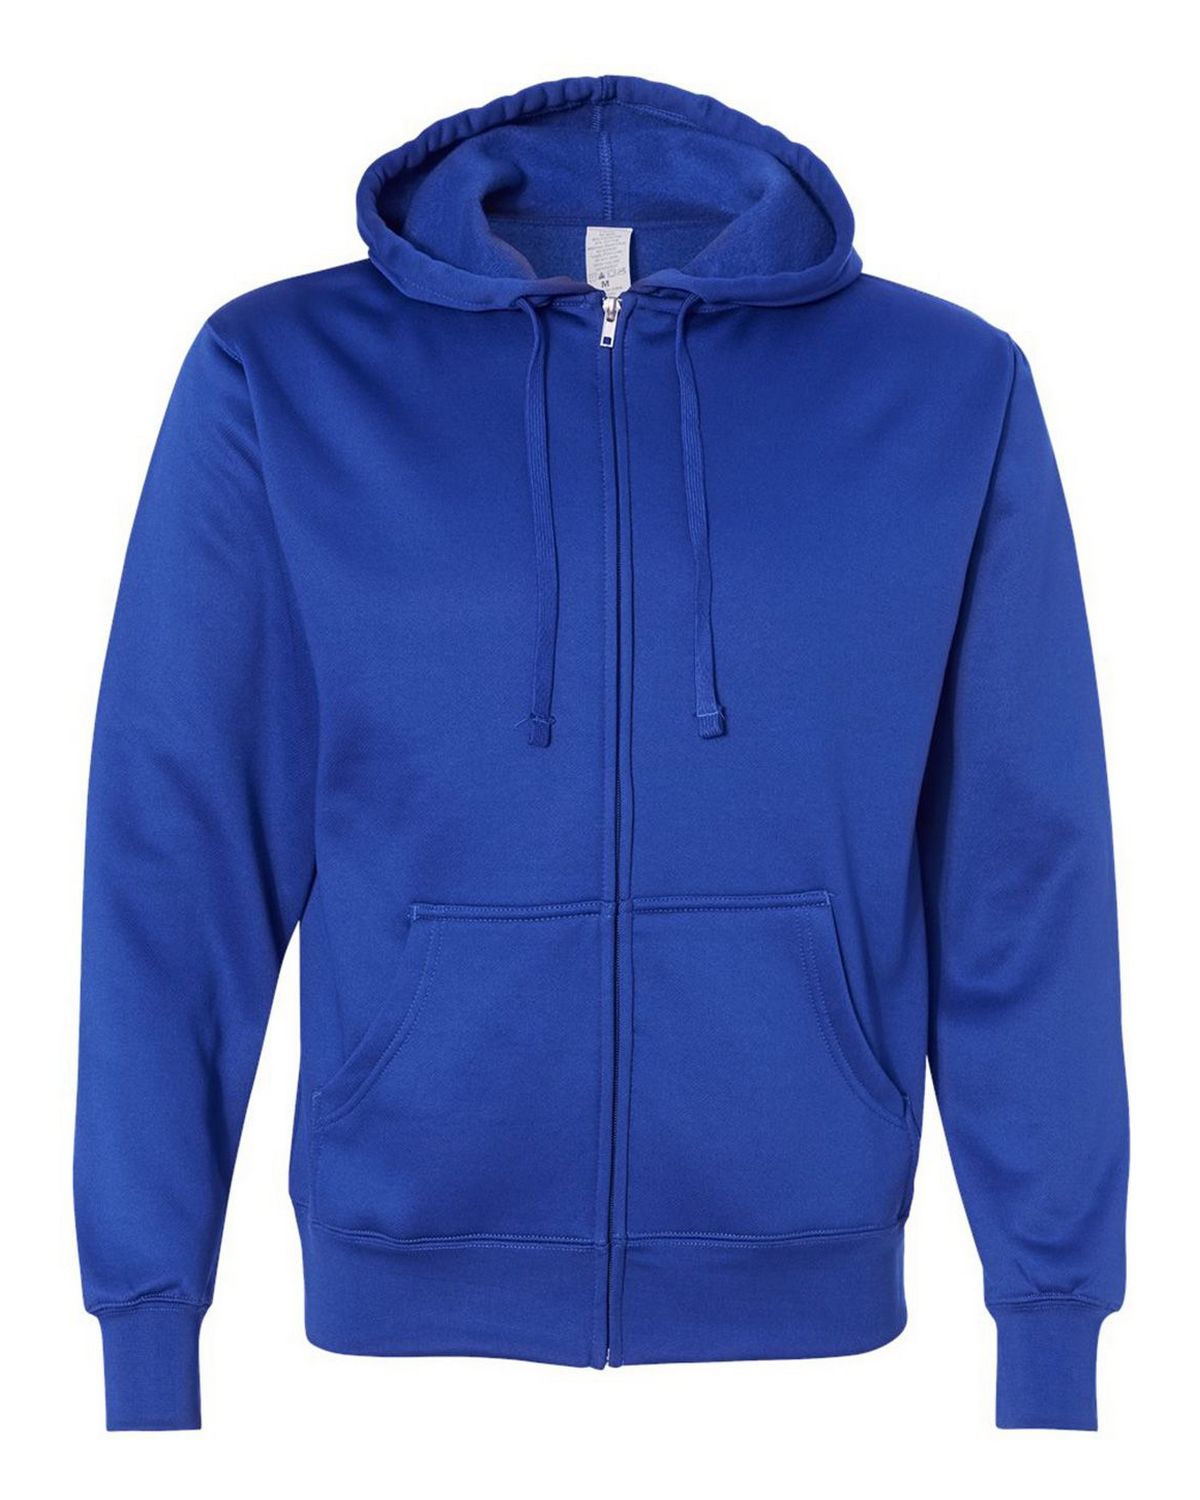 EXP444PZ Poly-Tech Hooded Full-Zip Sweatshirt Independent Trading Co